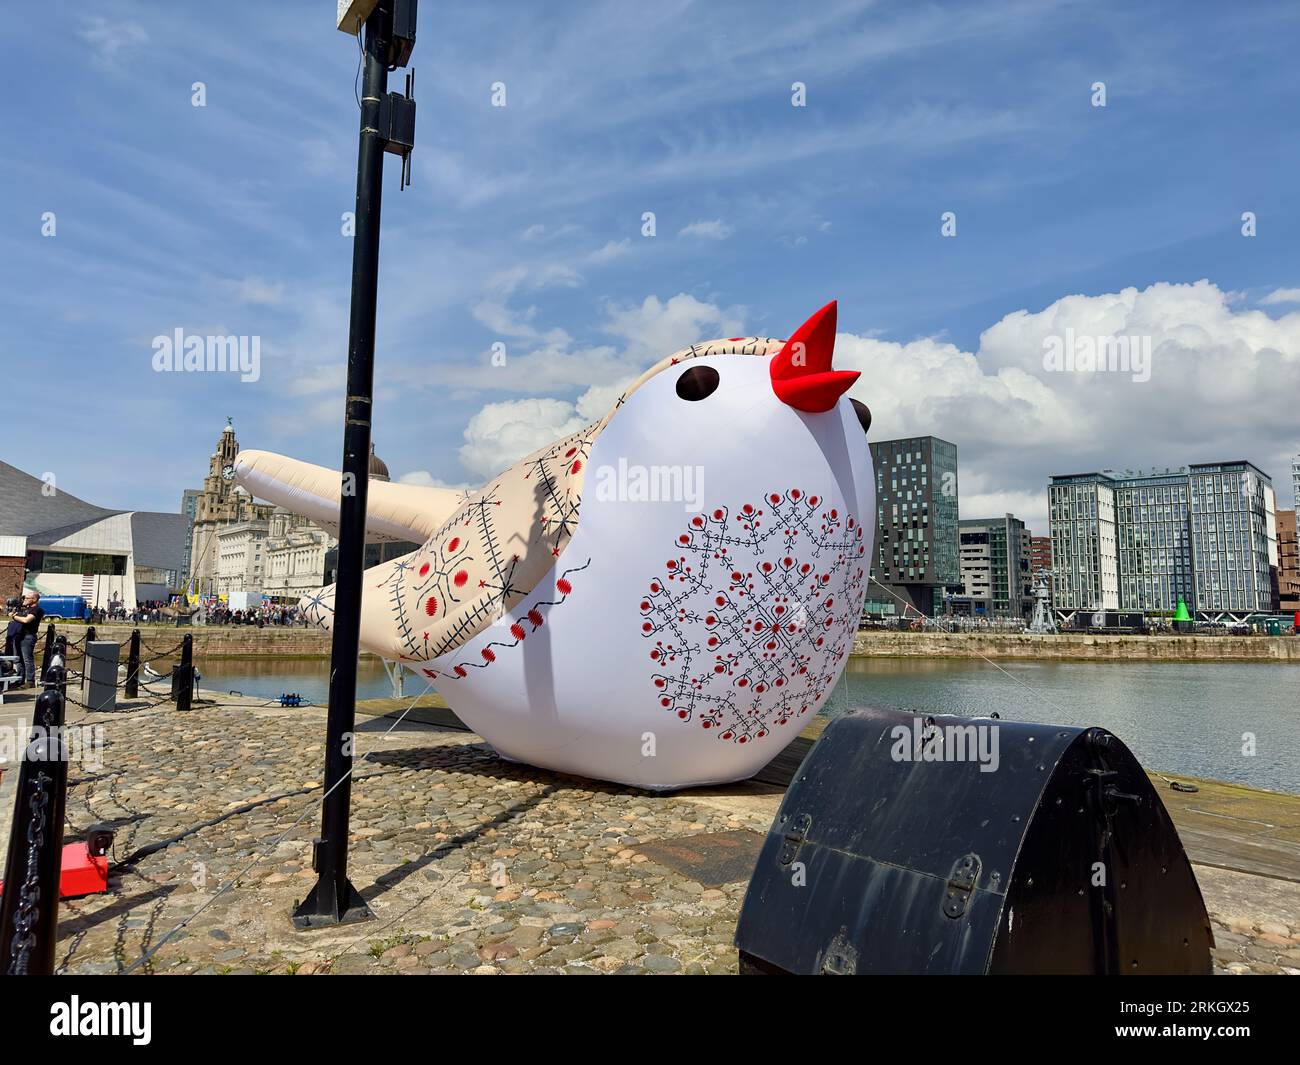 An areal view of a Solovey Bird perched on a railing in Liverpool, United Kingdom Stock Photo